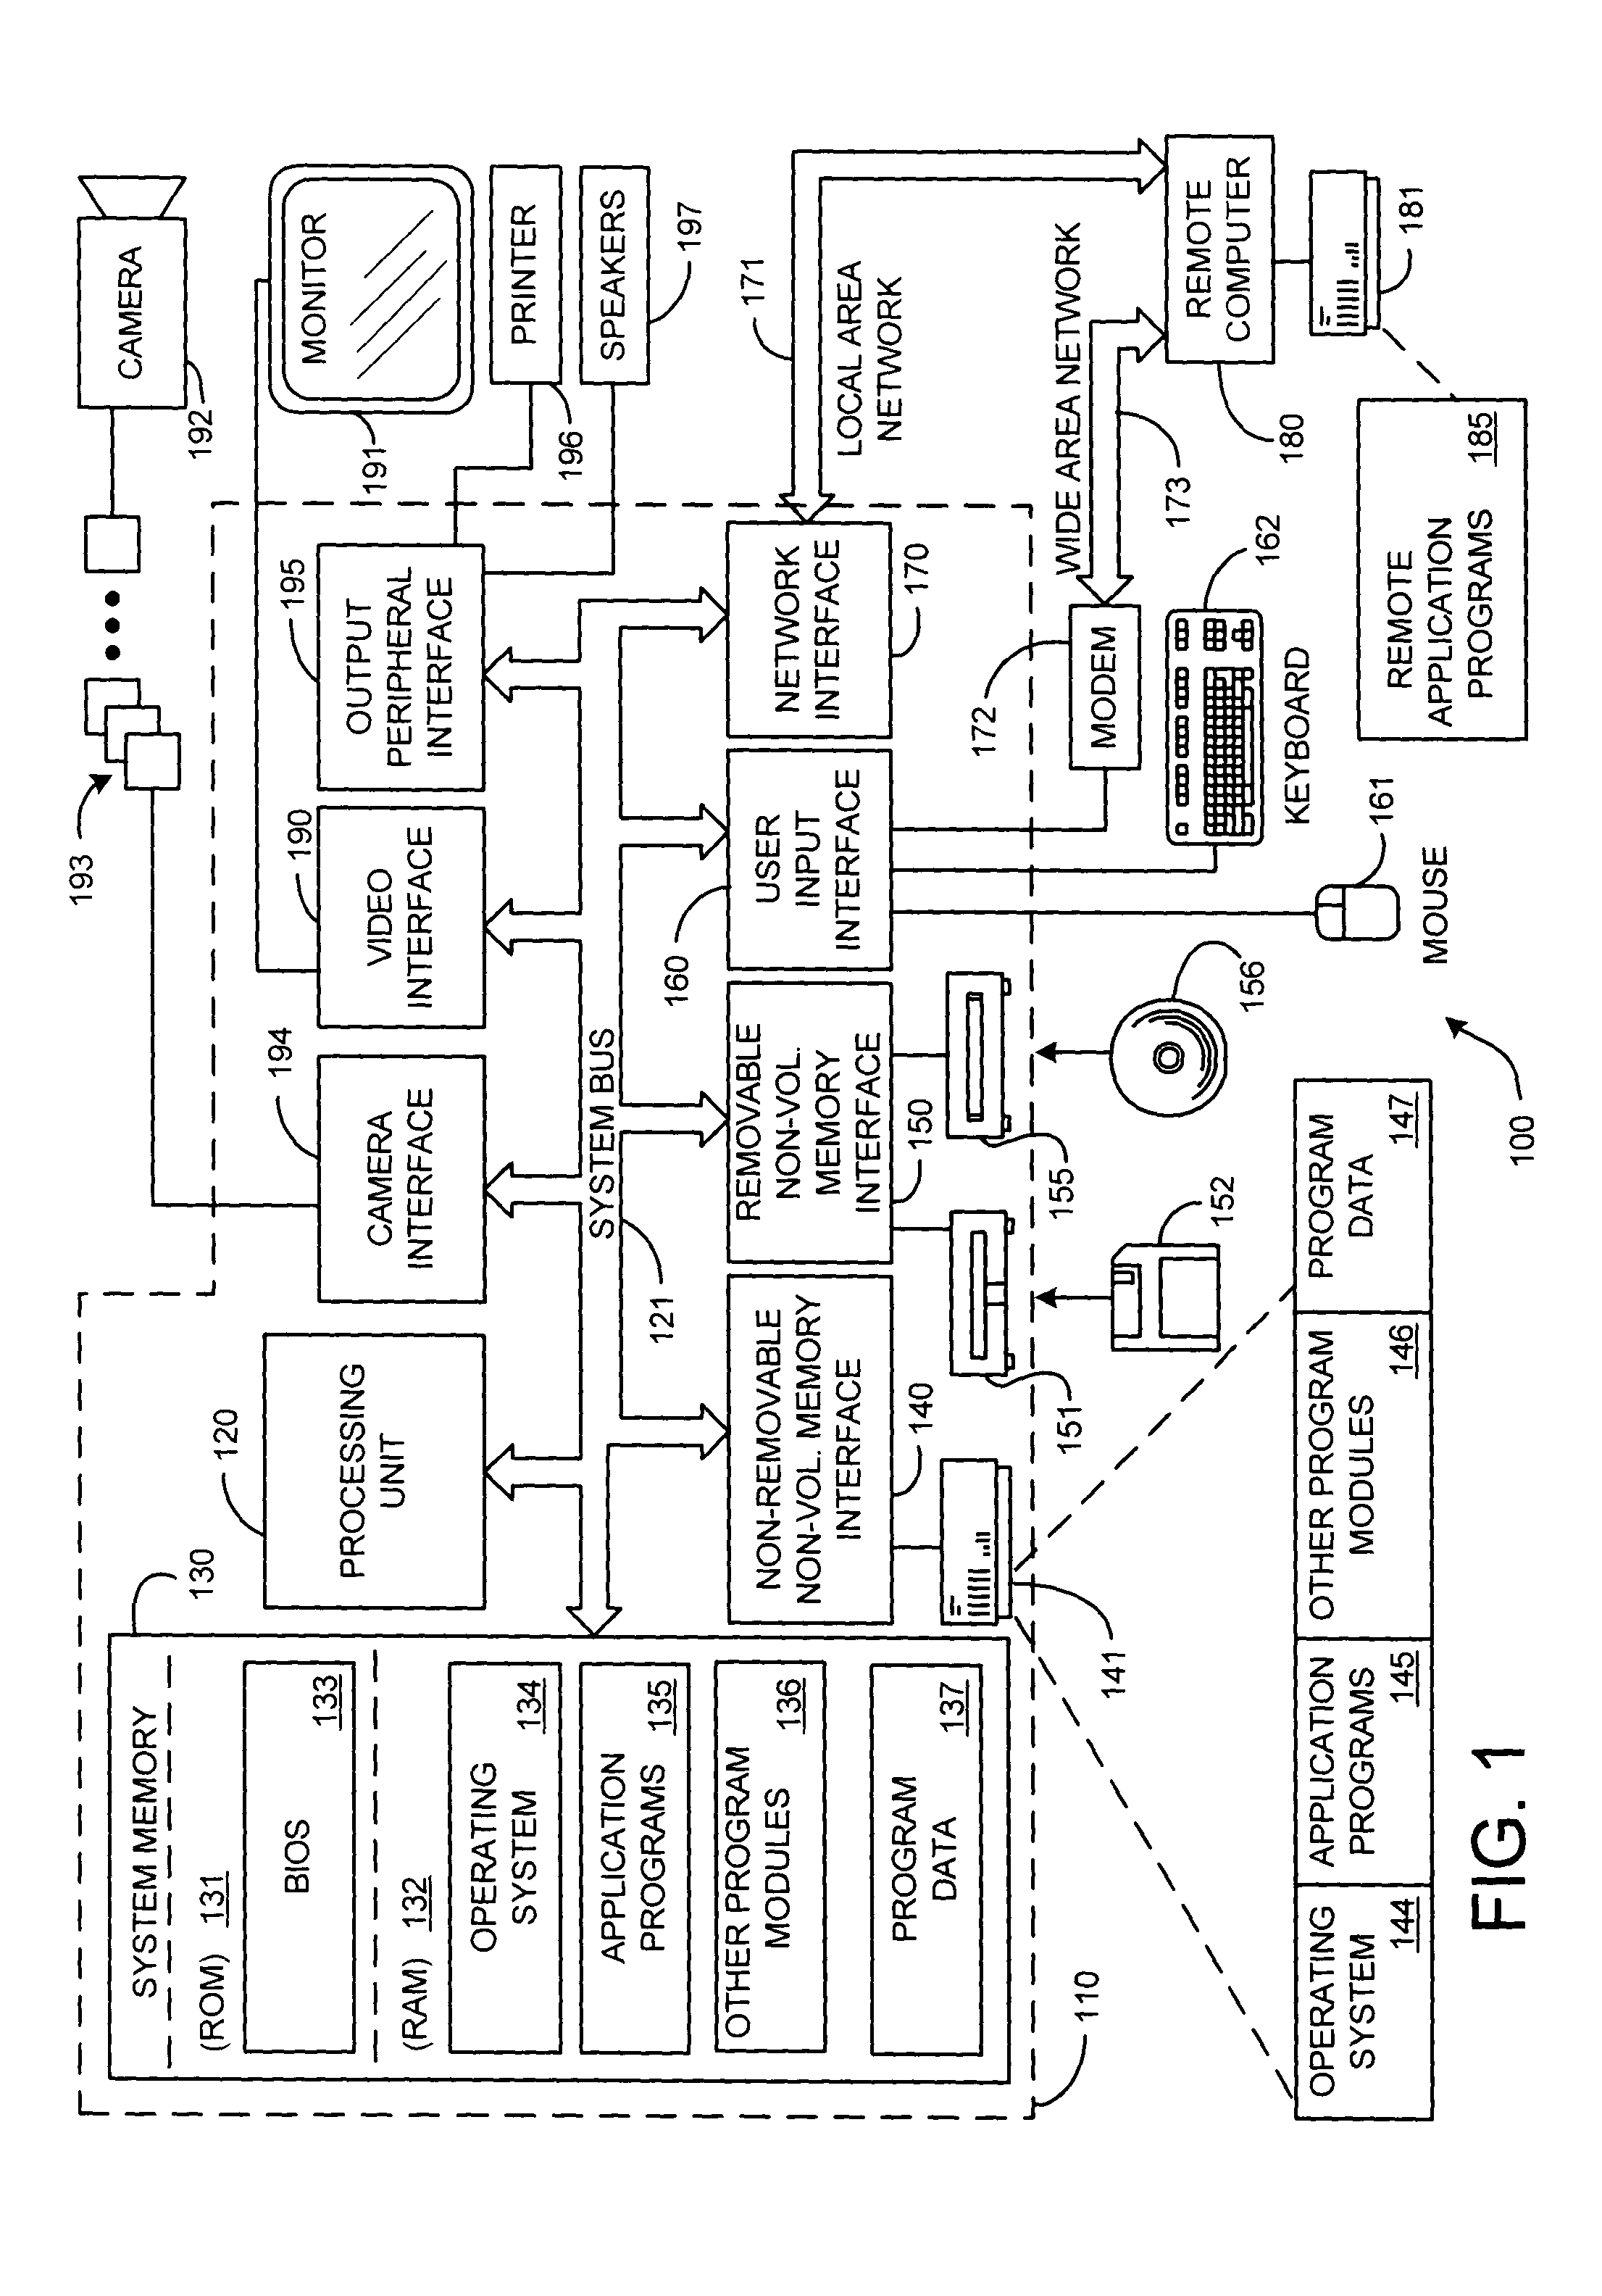 System and process for generating representations of objects using a directional histogram model and matrix descriptor